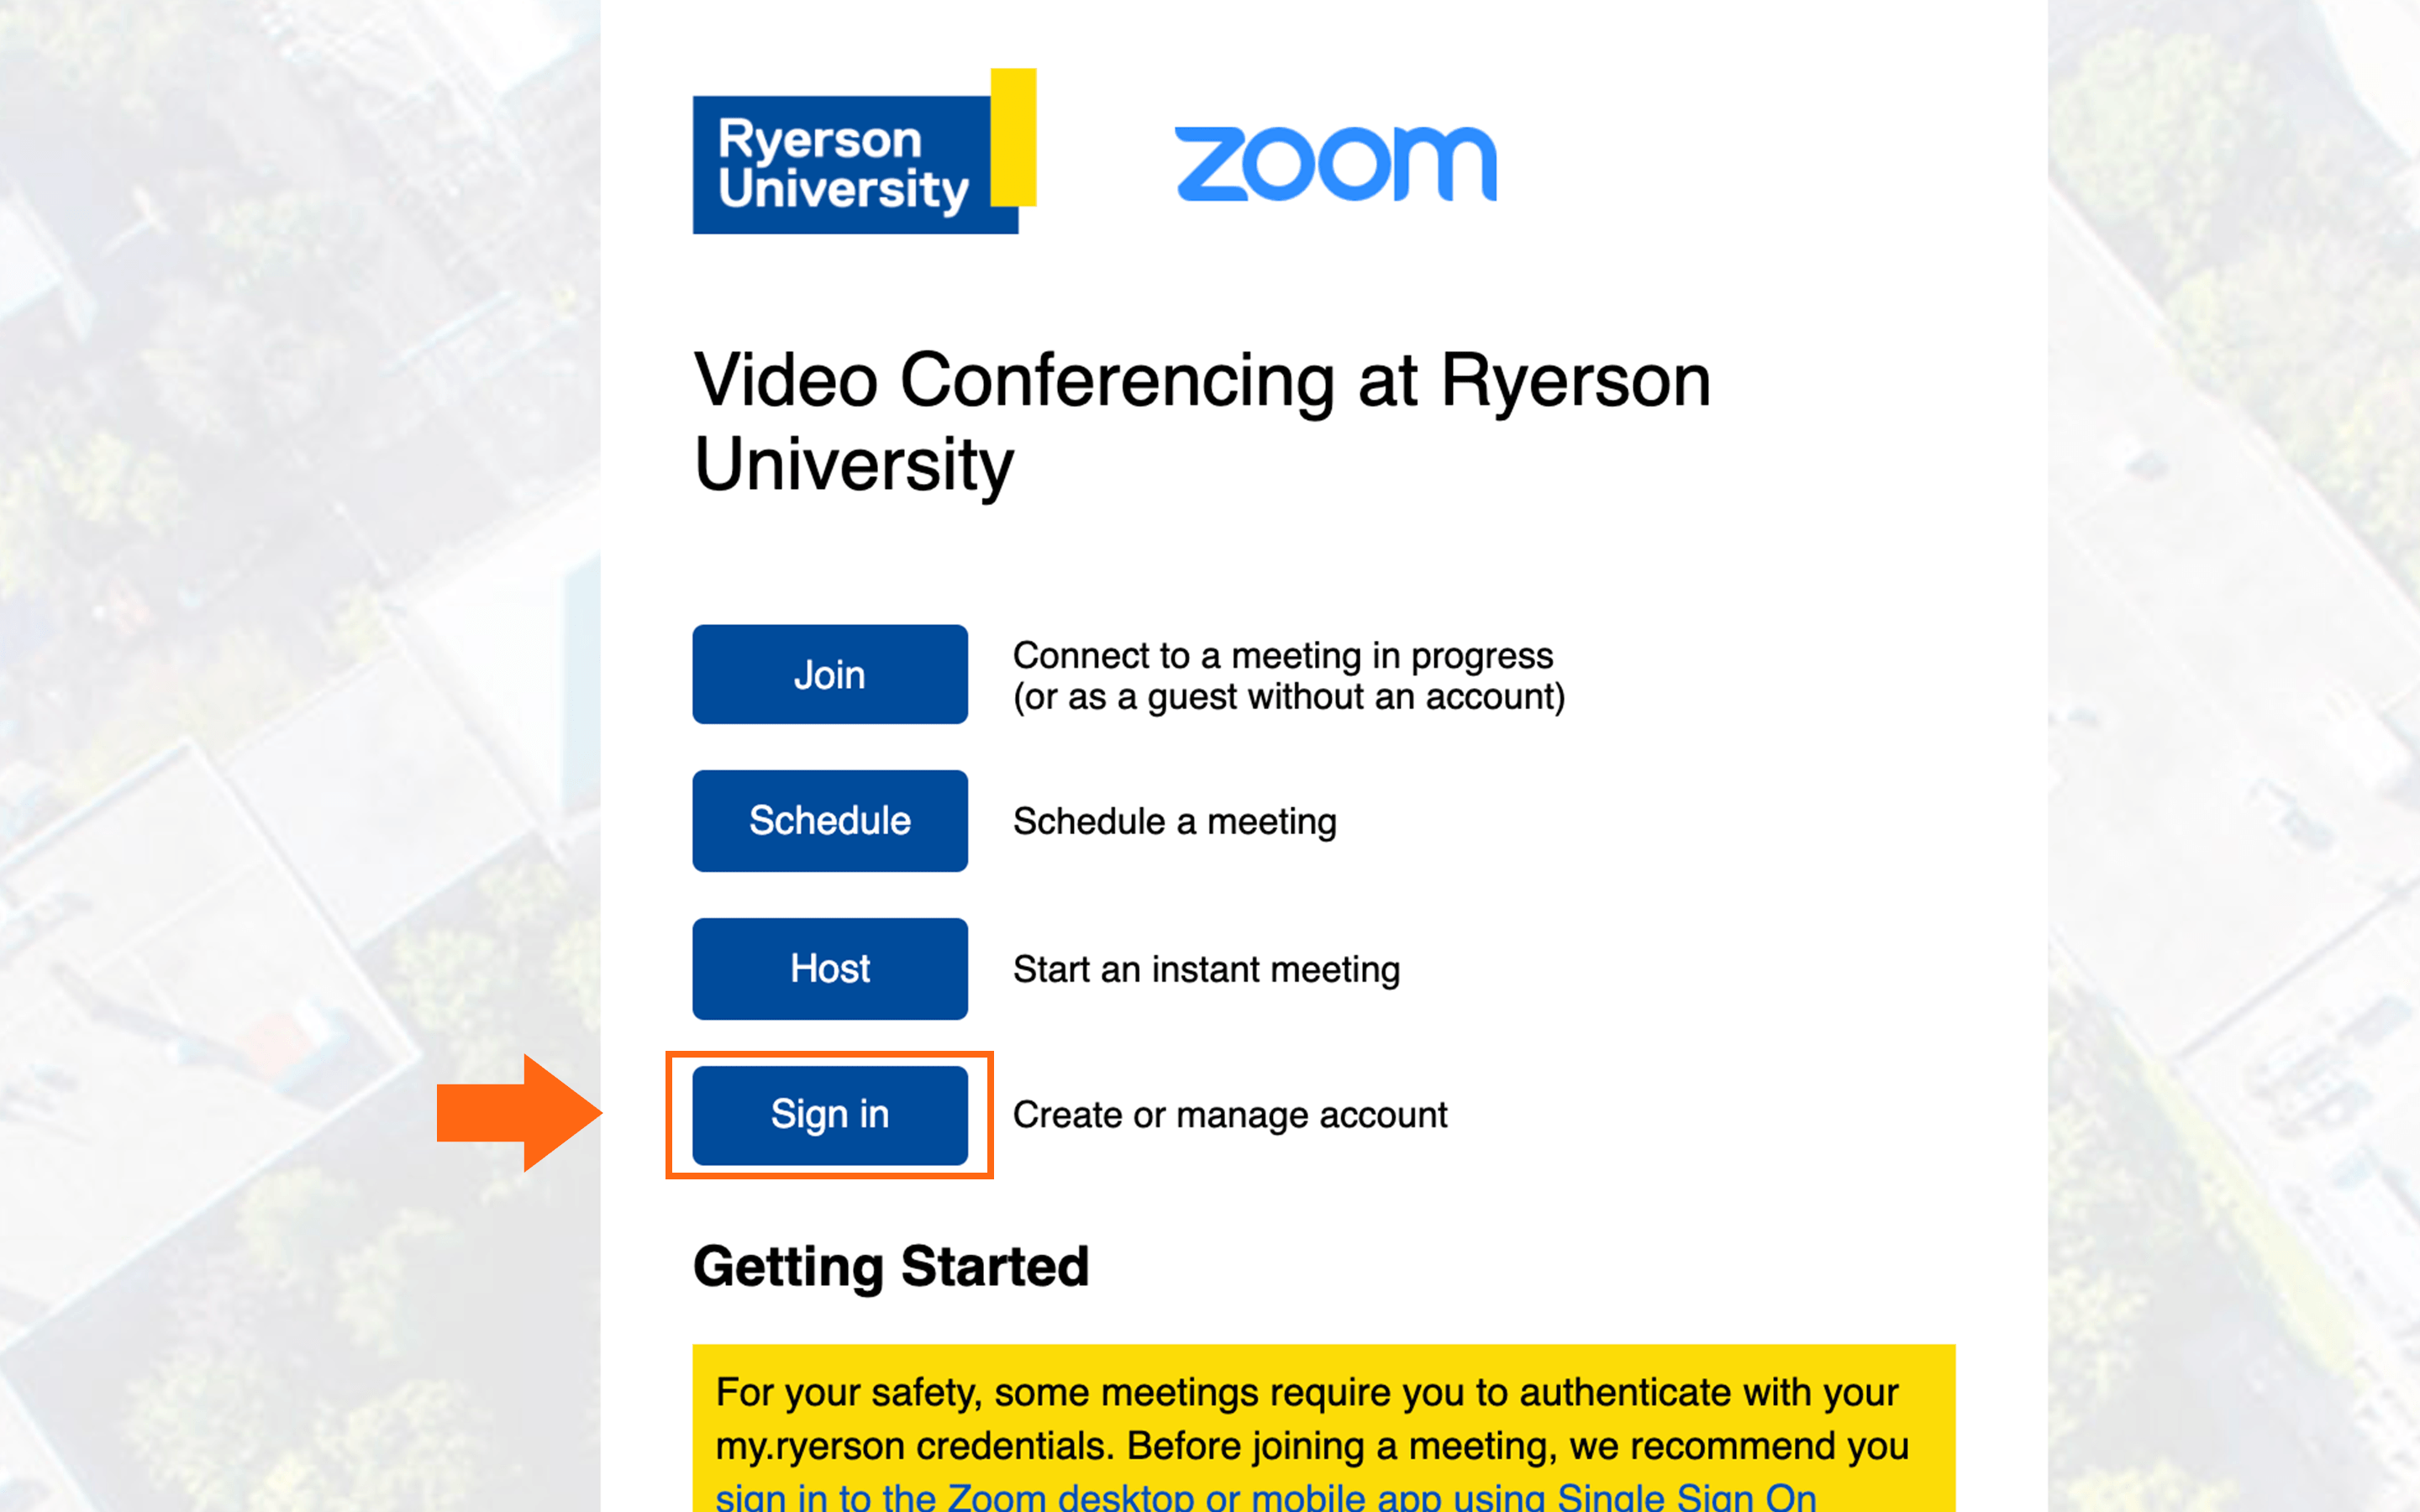 Signing into zoom.ryerson.ca